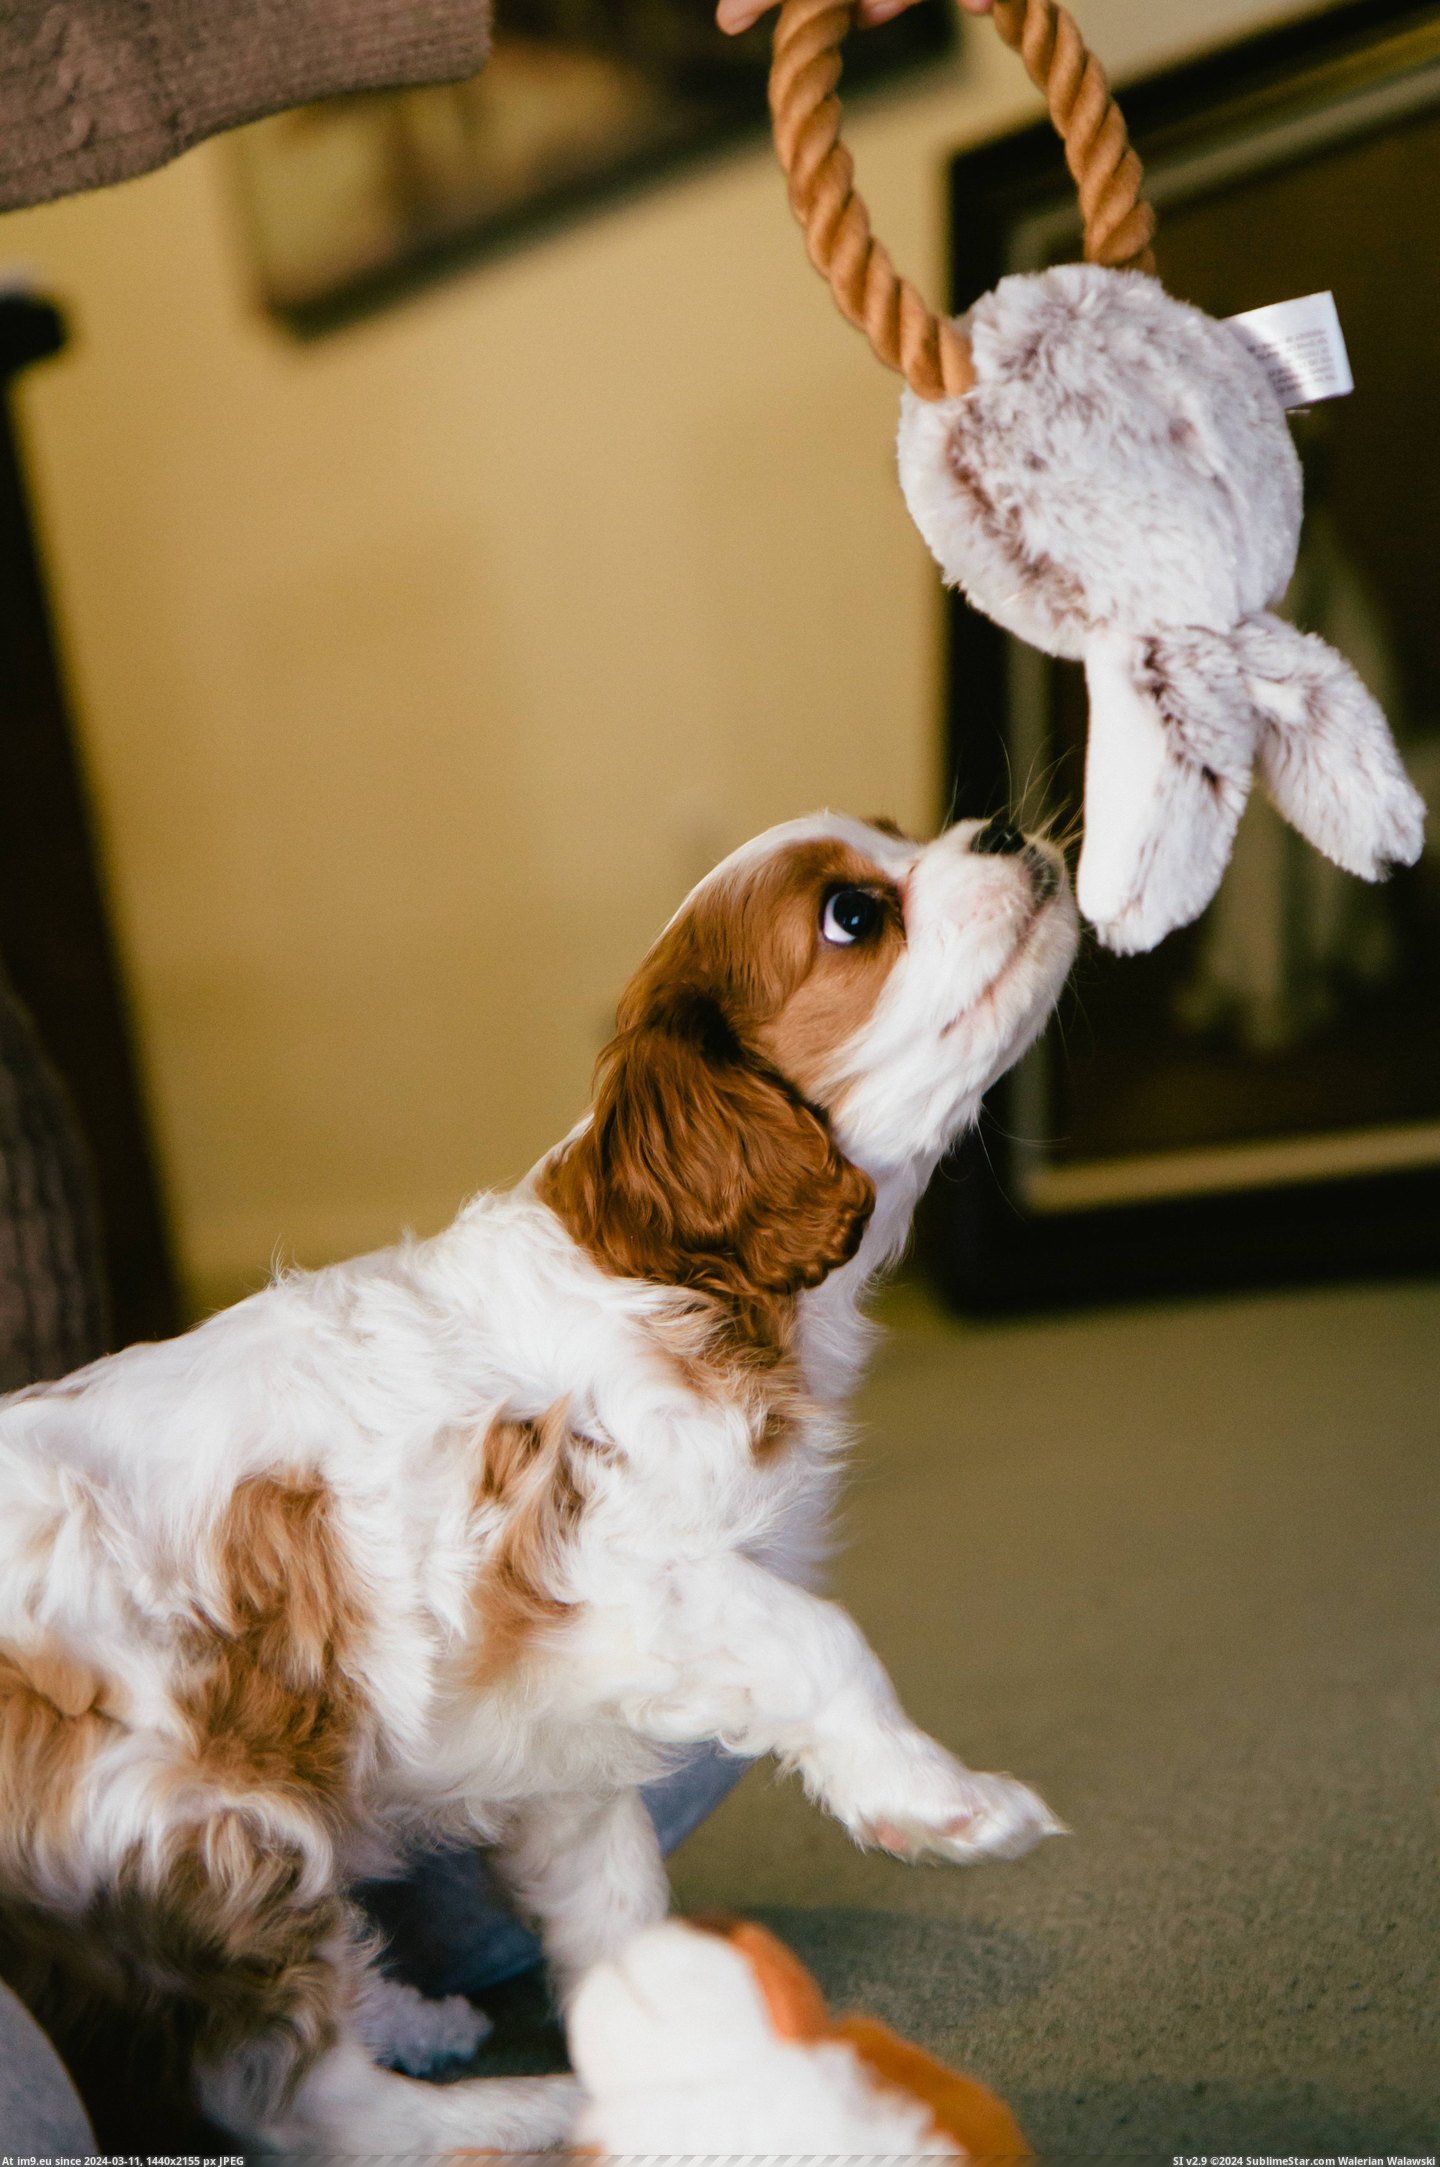 #Old #New #She #Our #Nami #Cavalier #Spaniel #Week #King #Say #Charles [Aww] Please say hello to Nami! She's our new 8-week old Cavalier King Charles Spaniel. 1 Pic. (Изображение из альбом My r/AWW favs))